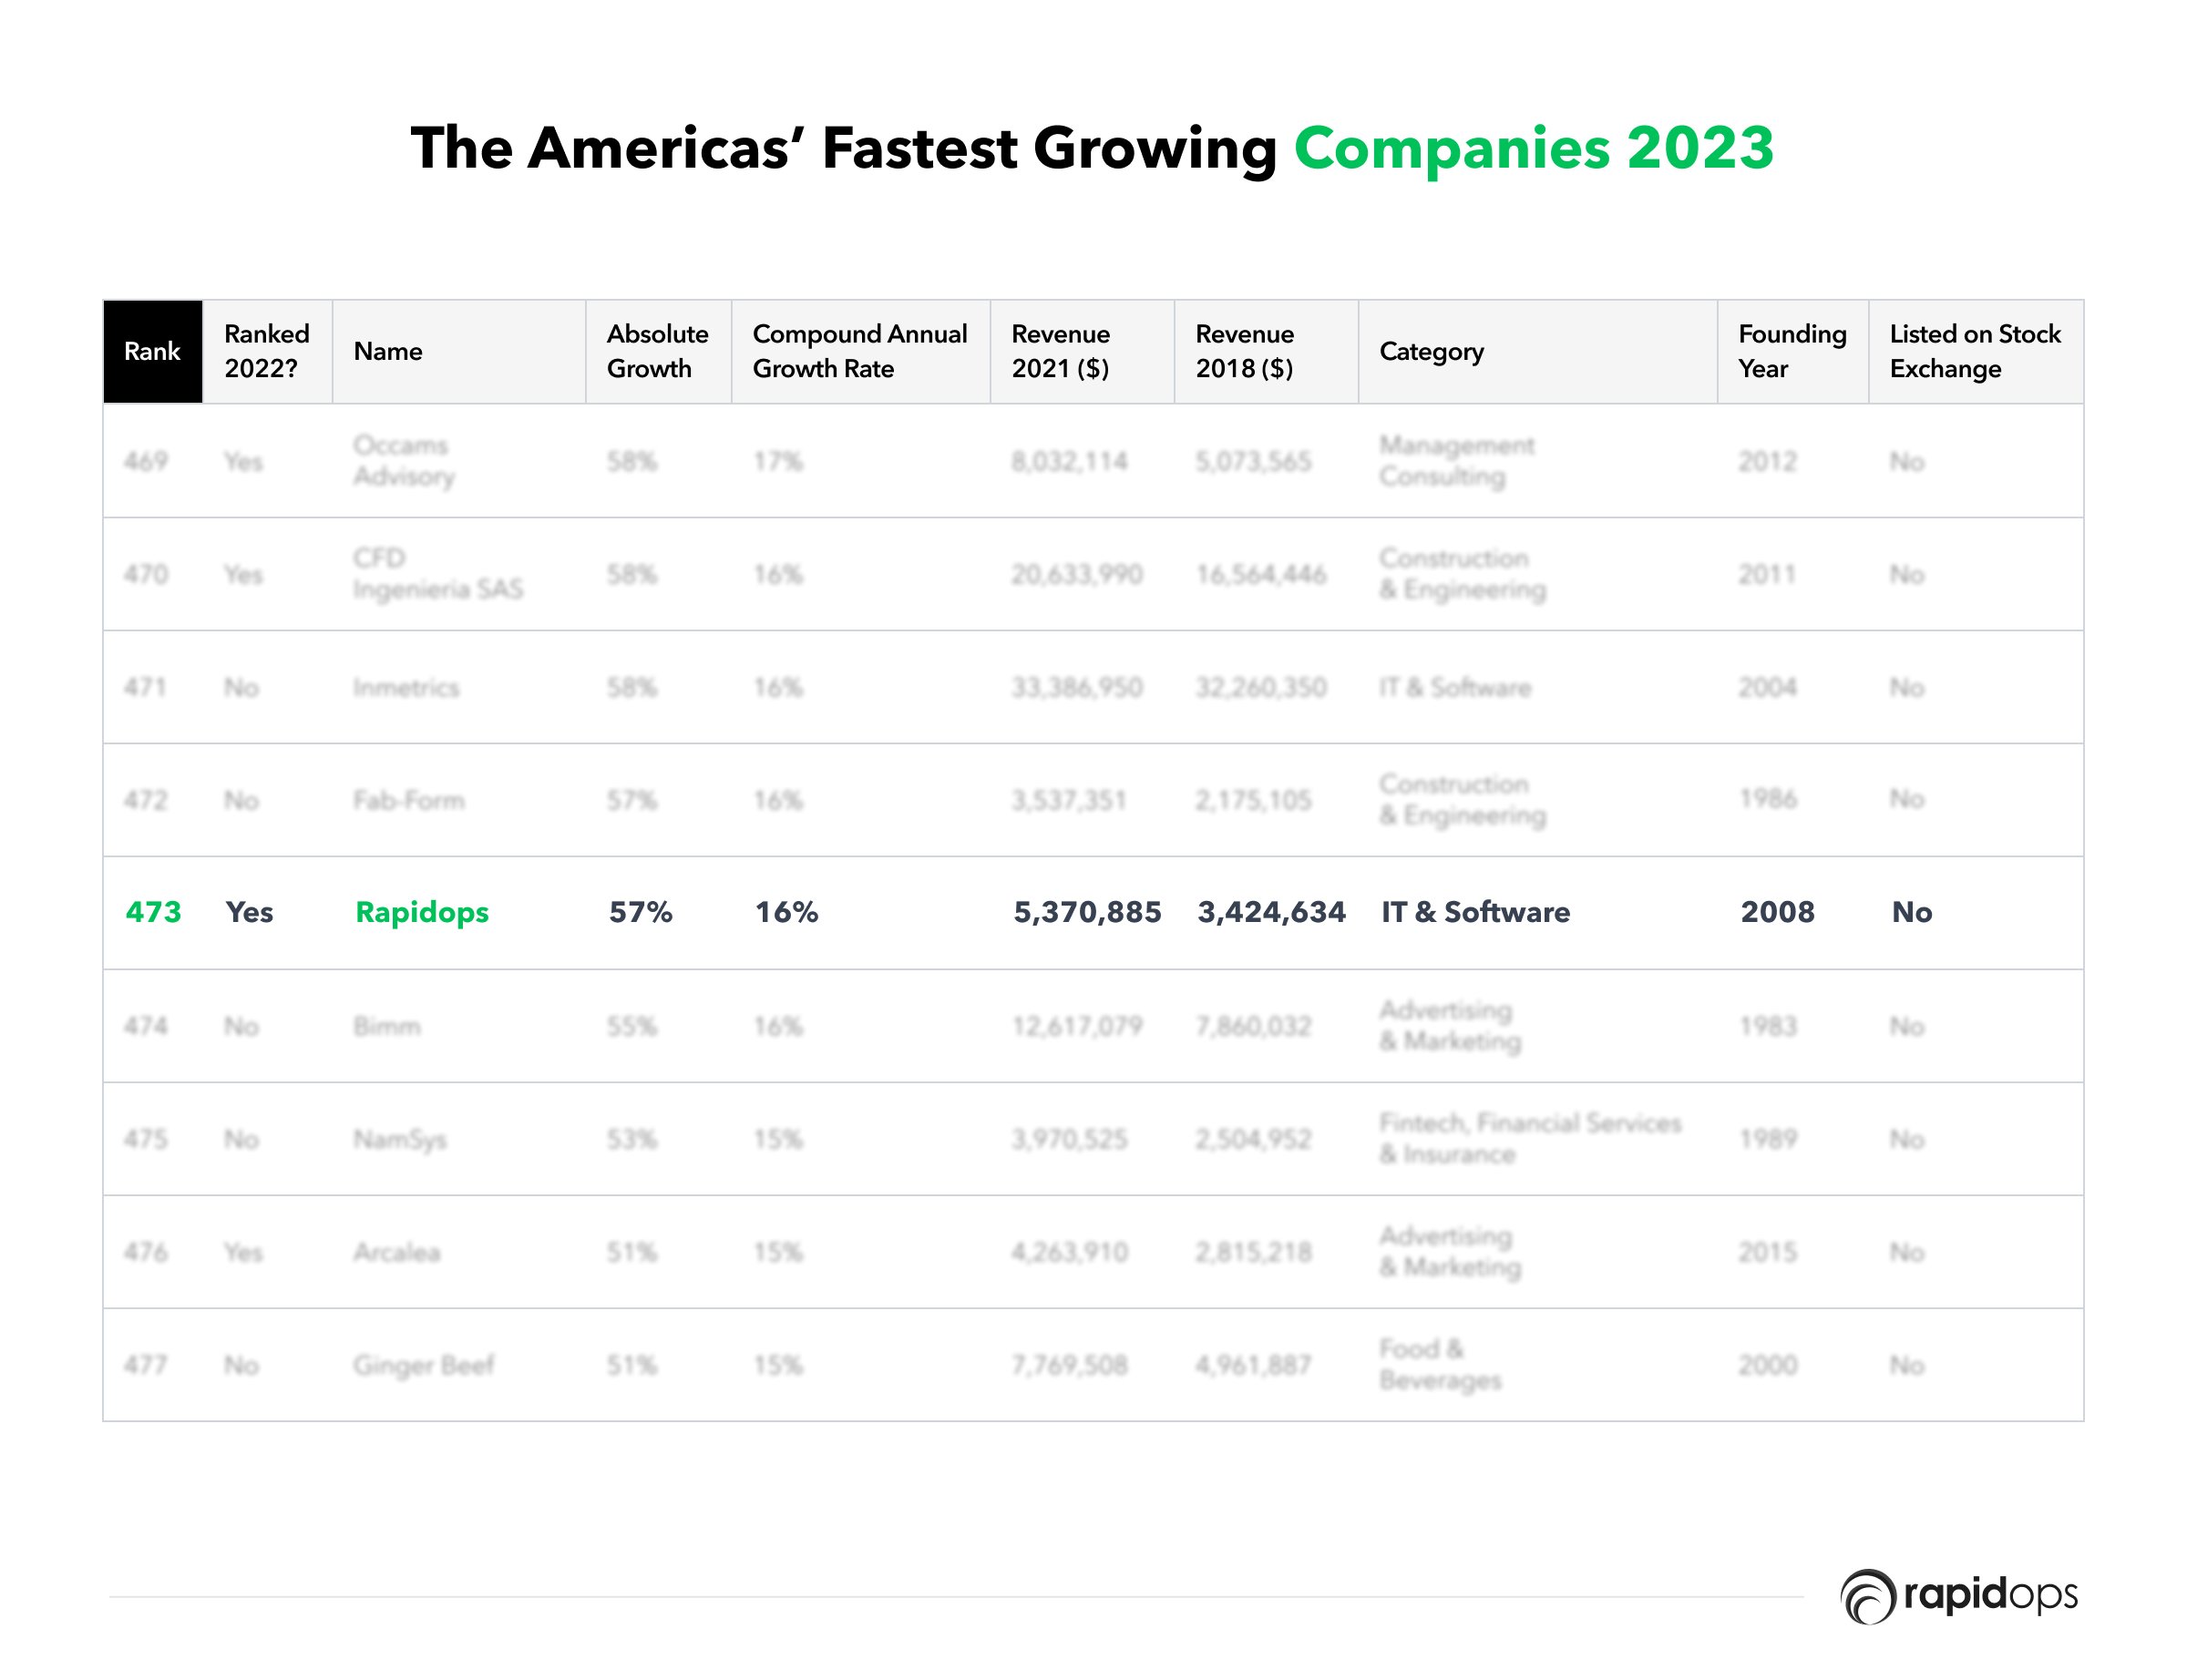 The Americas’ Fastest Growing Companies 2023 List